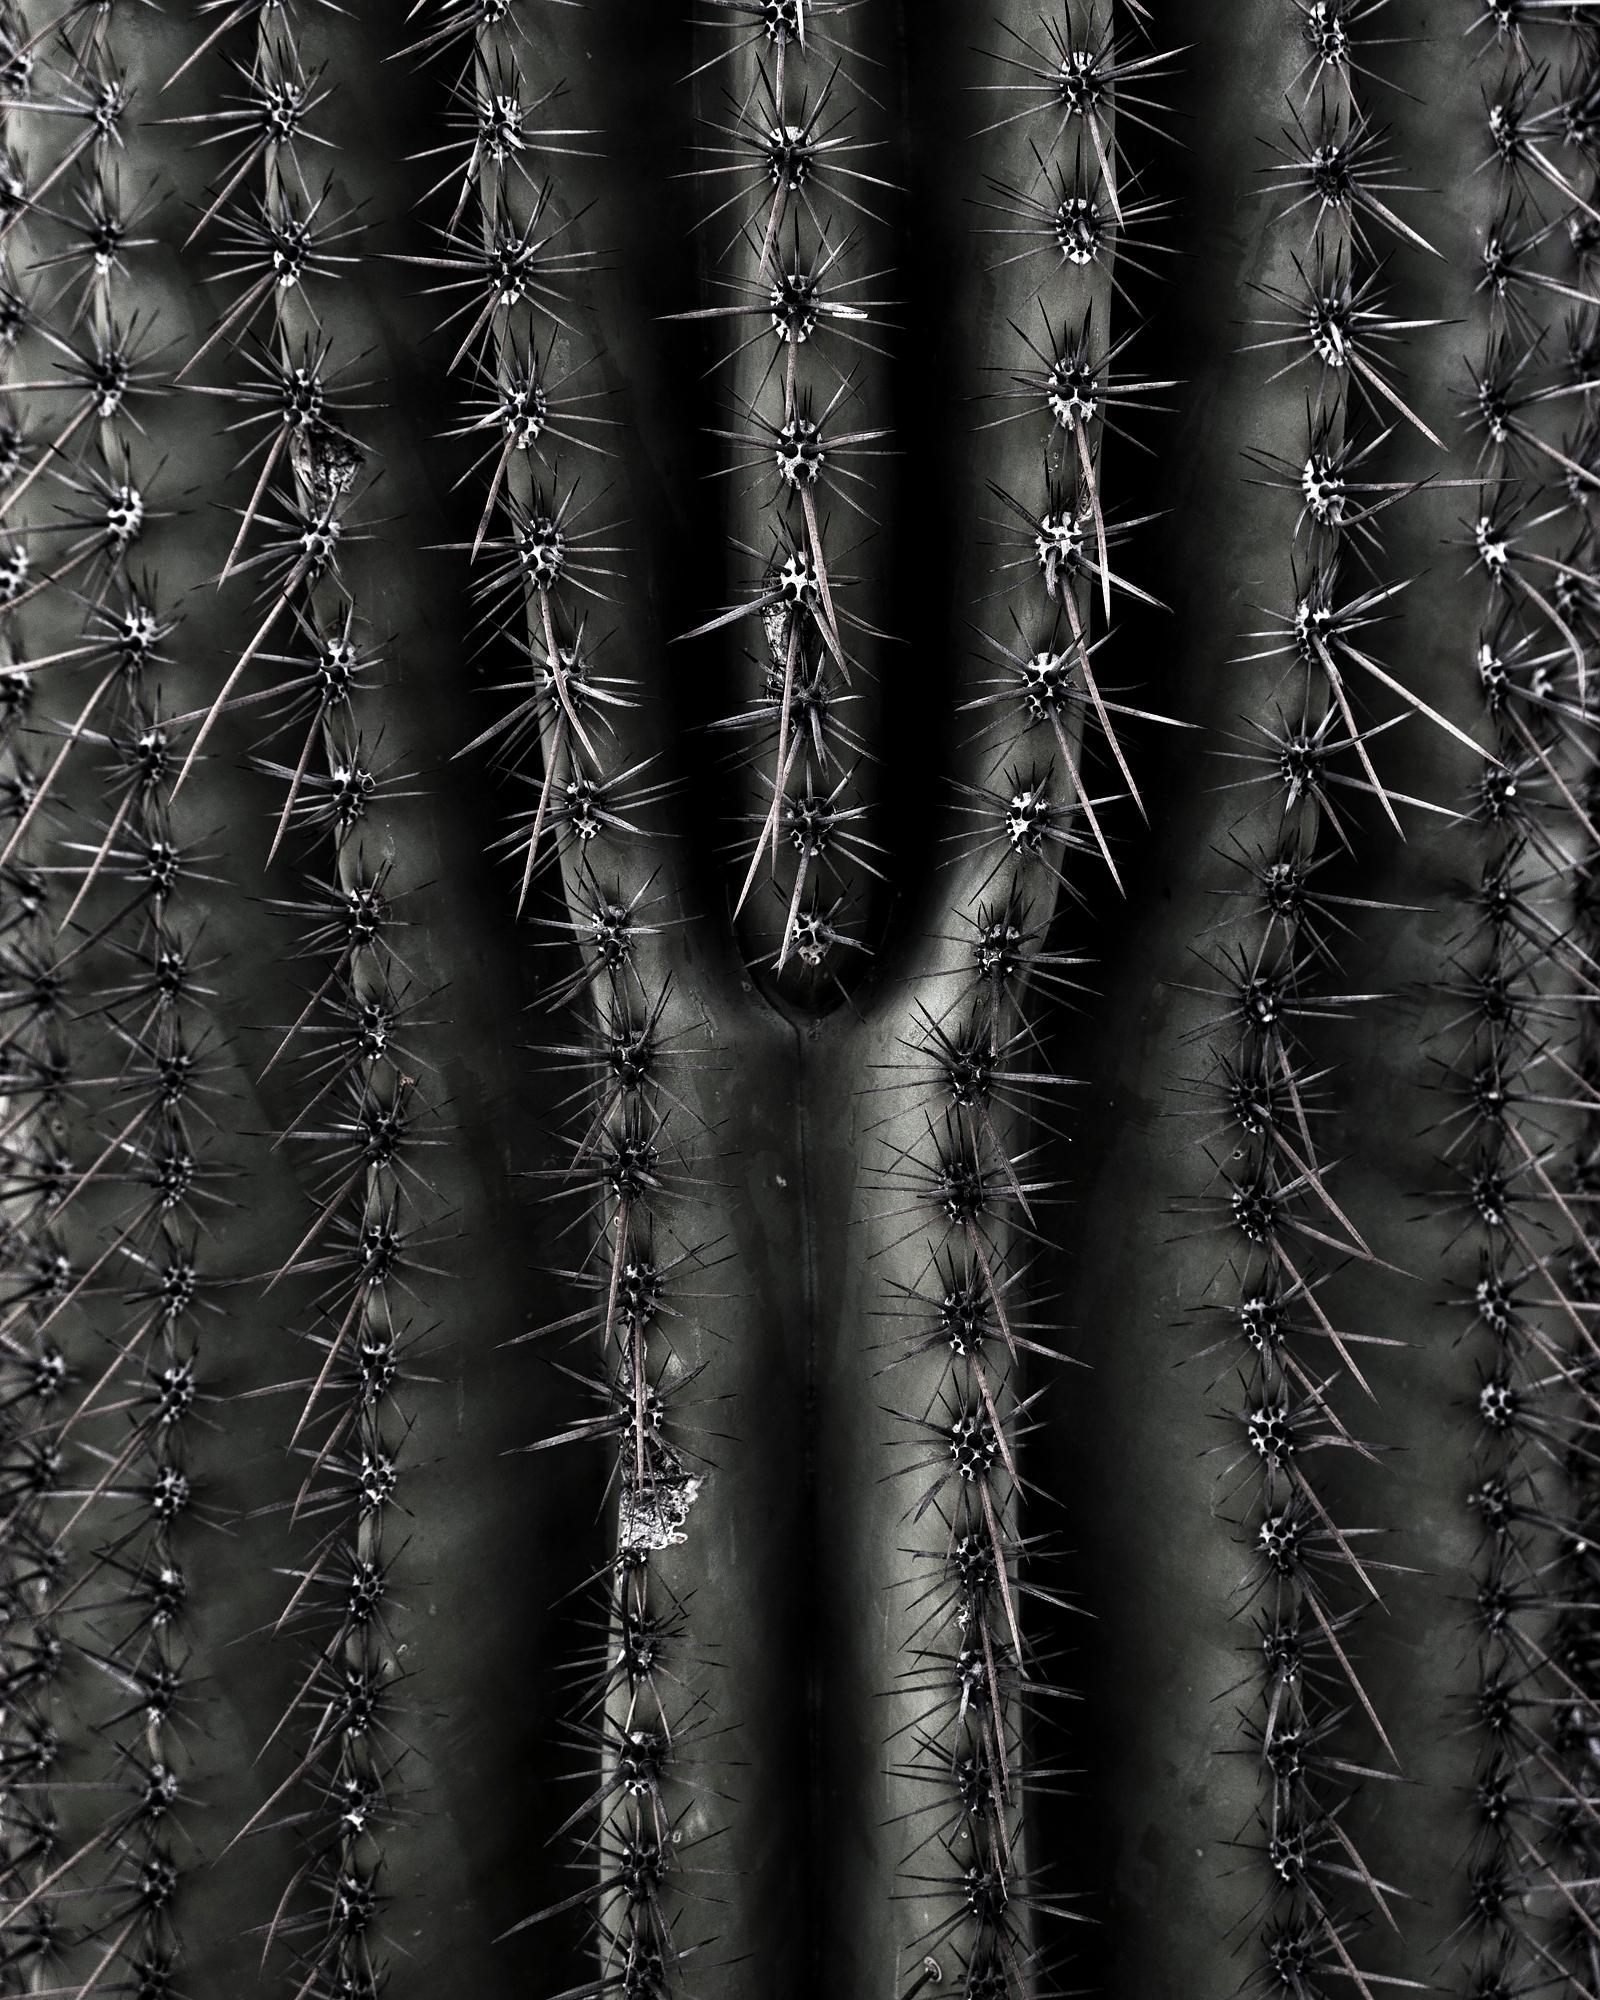 American Limited Edition Prints from Desert Bellows, A Saguaro Series by Andrew Johnson For Sale